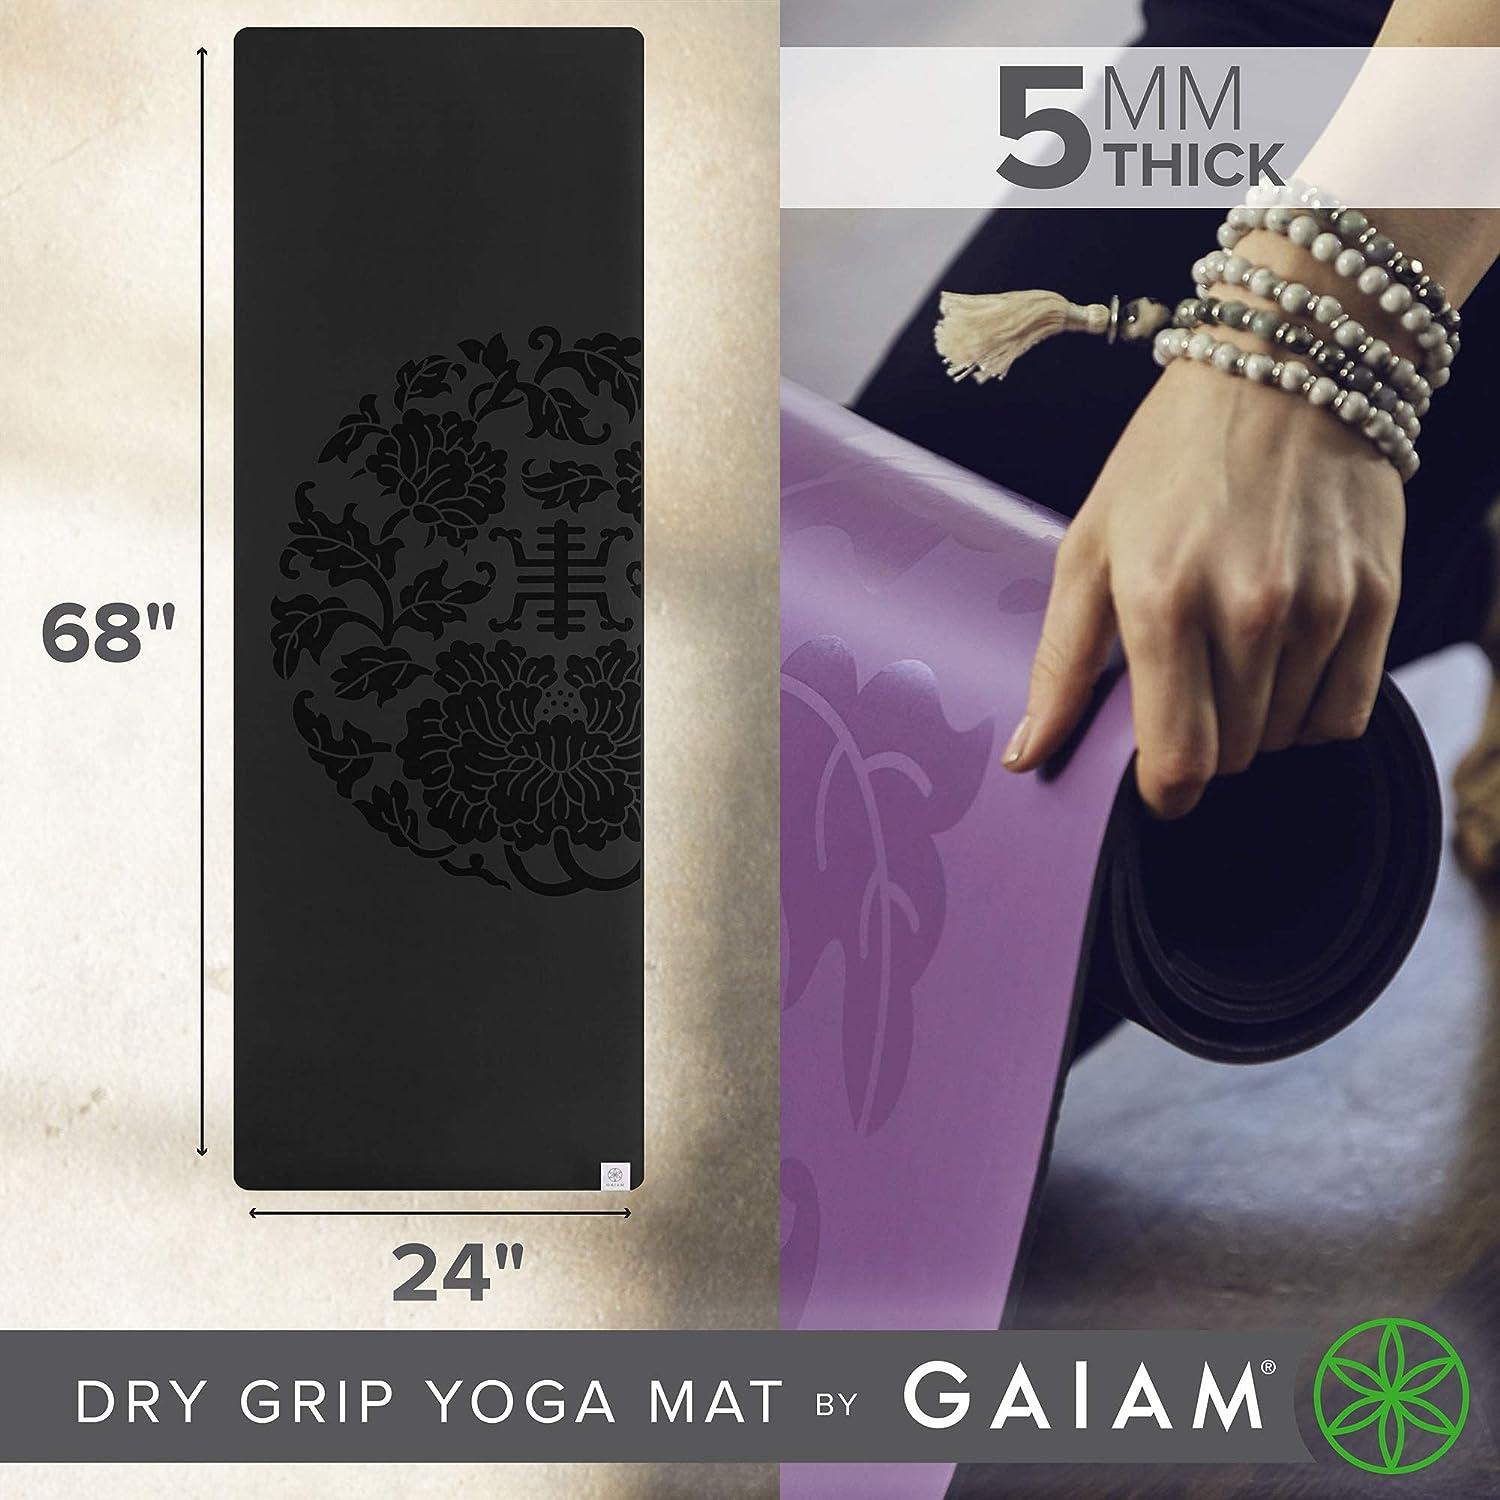 Gaiam Yoga Mat - Premium 5mm Dry-Grip Thick Non Slip Exercise & Fitness Mat  for Hot Yoga, Pilates & Floor Workouts (68 or 78L x 24 or 26W x 5mm)  Black